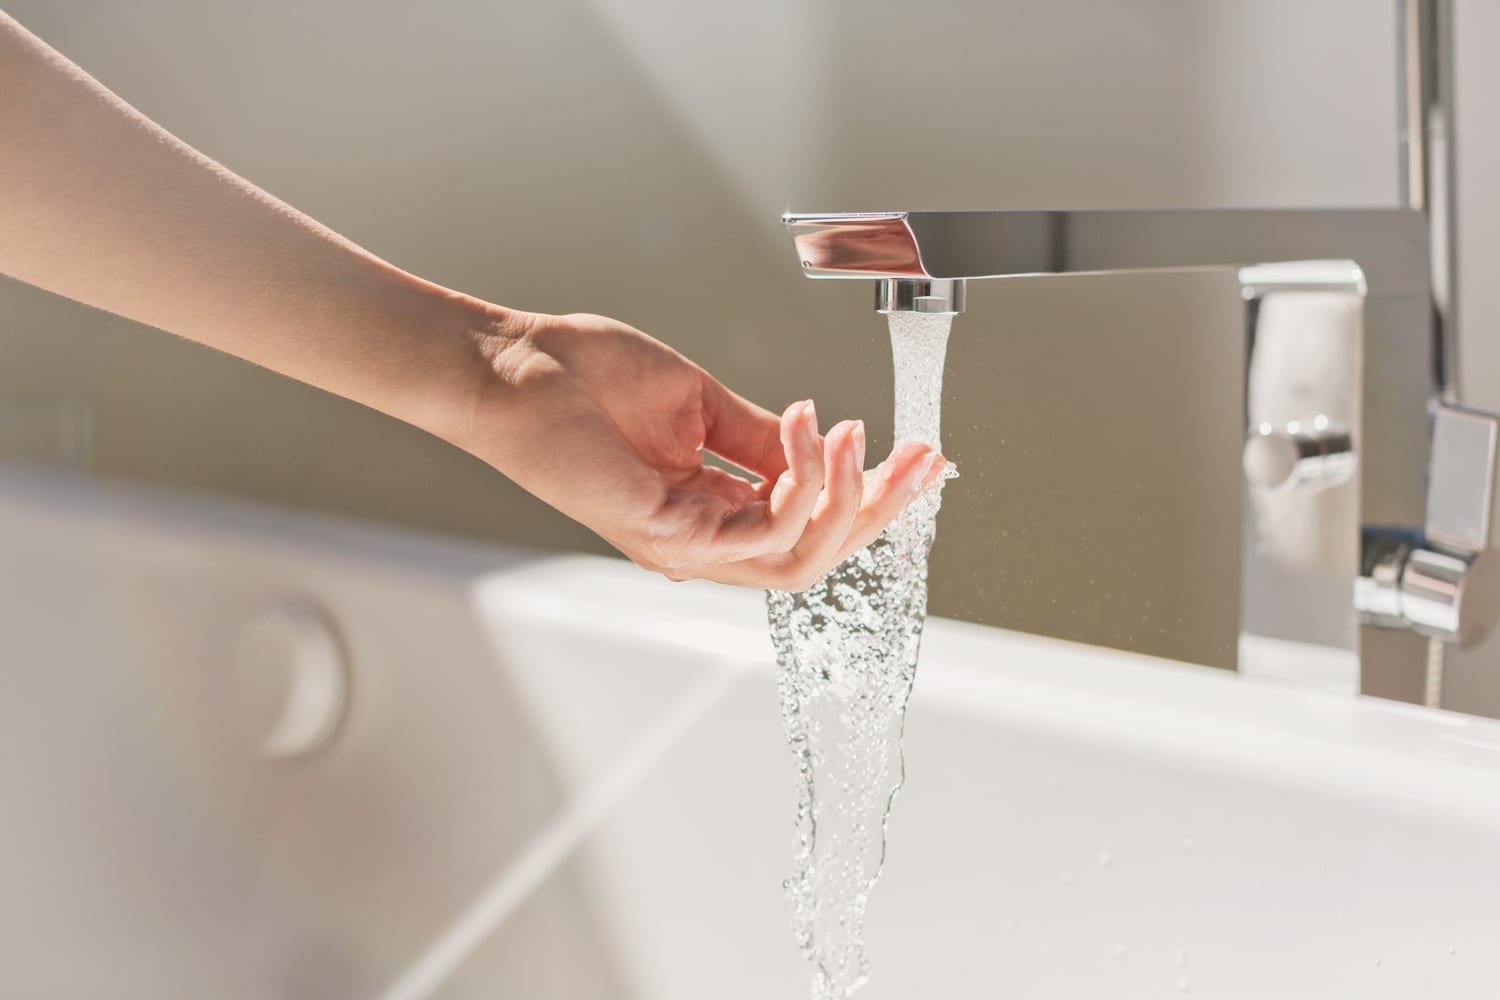 A woman's hand touches water from a faucet.